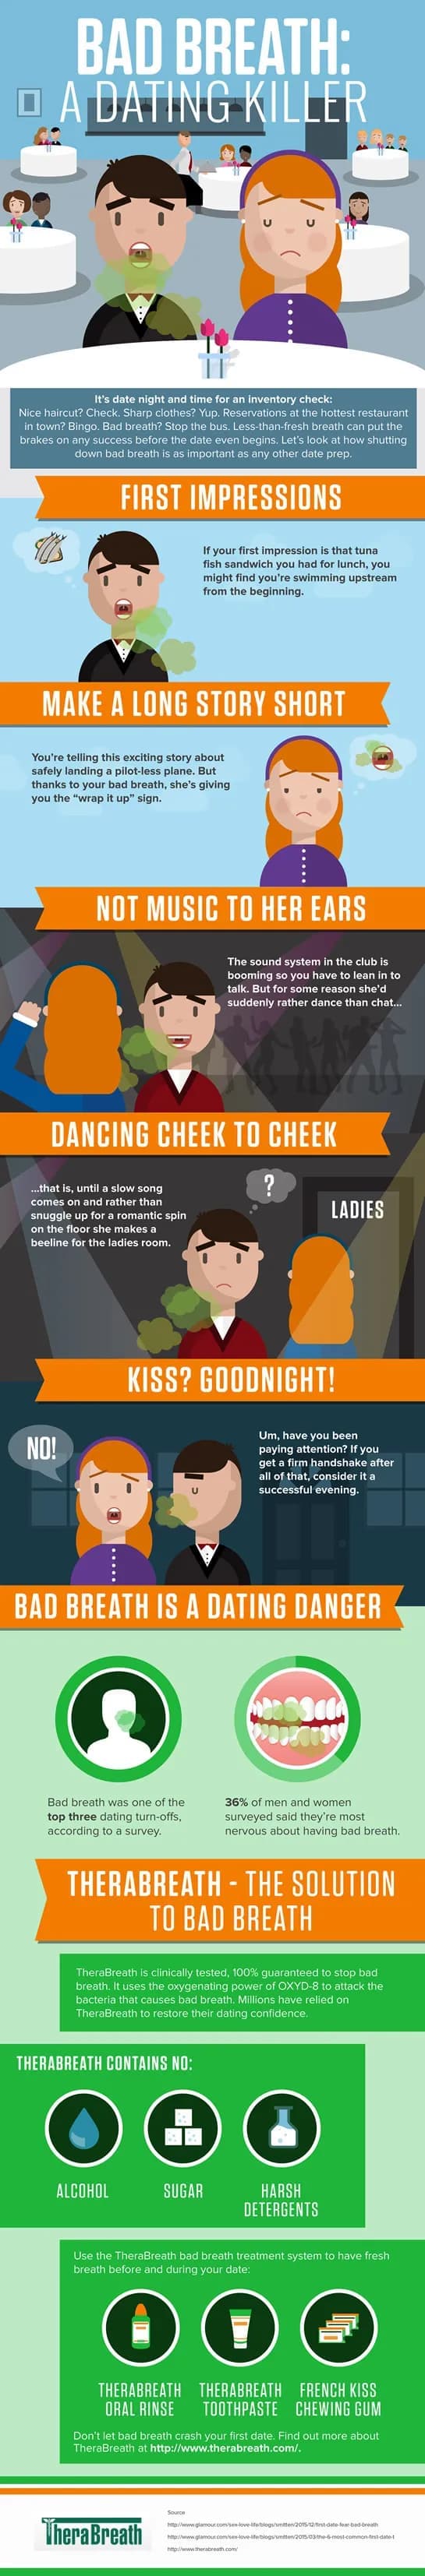 Full-size image of the Bad Breath: A Dating Killer infographic